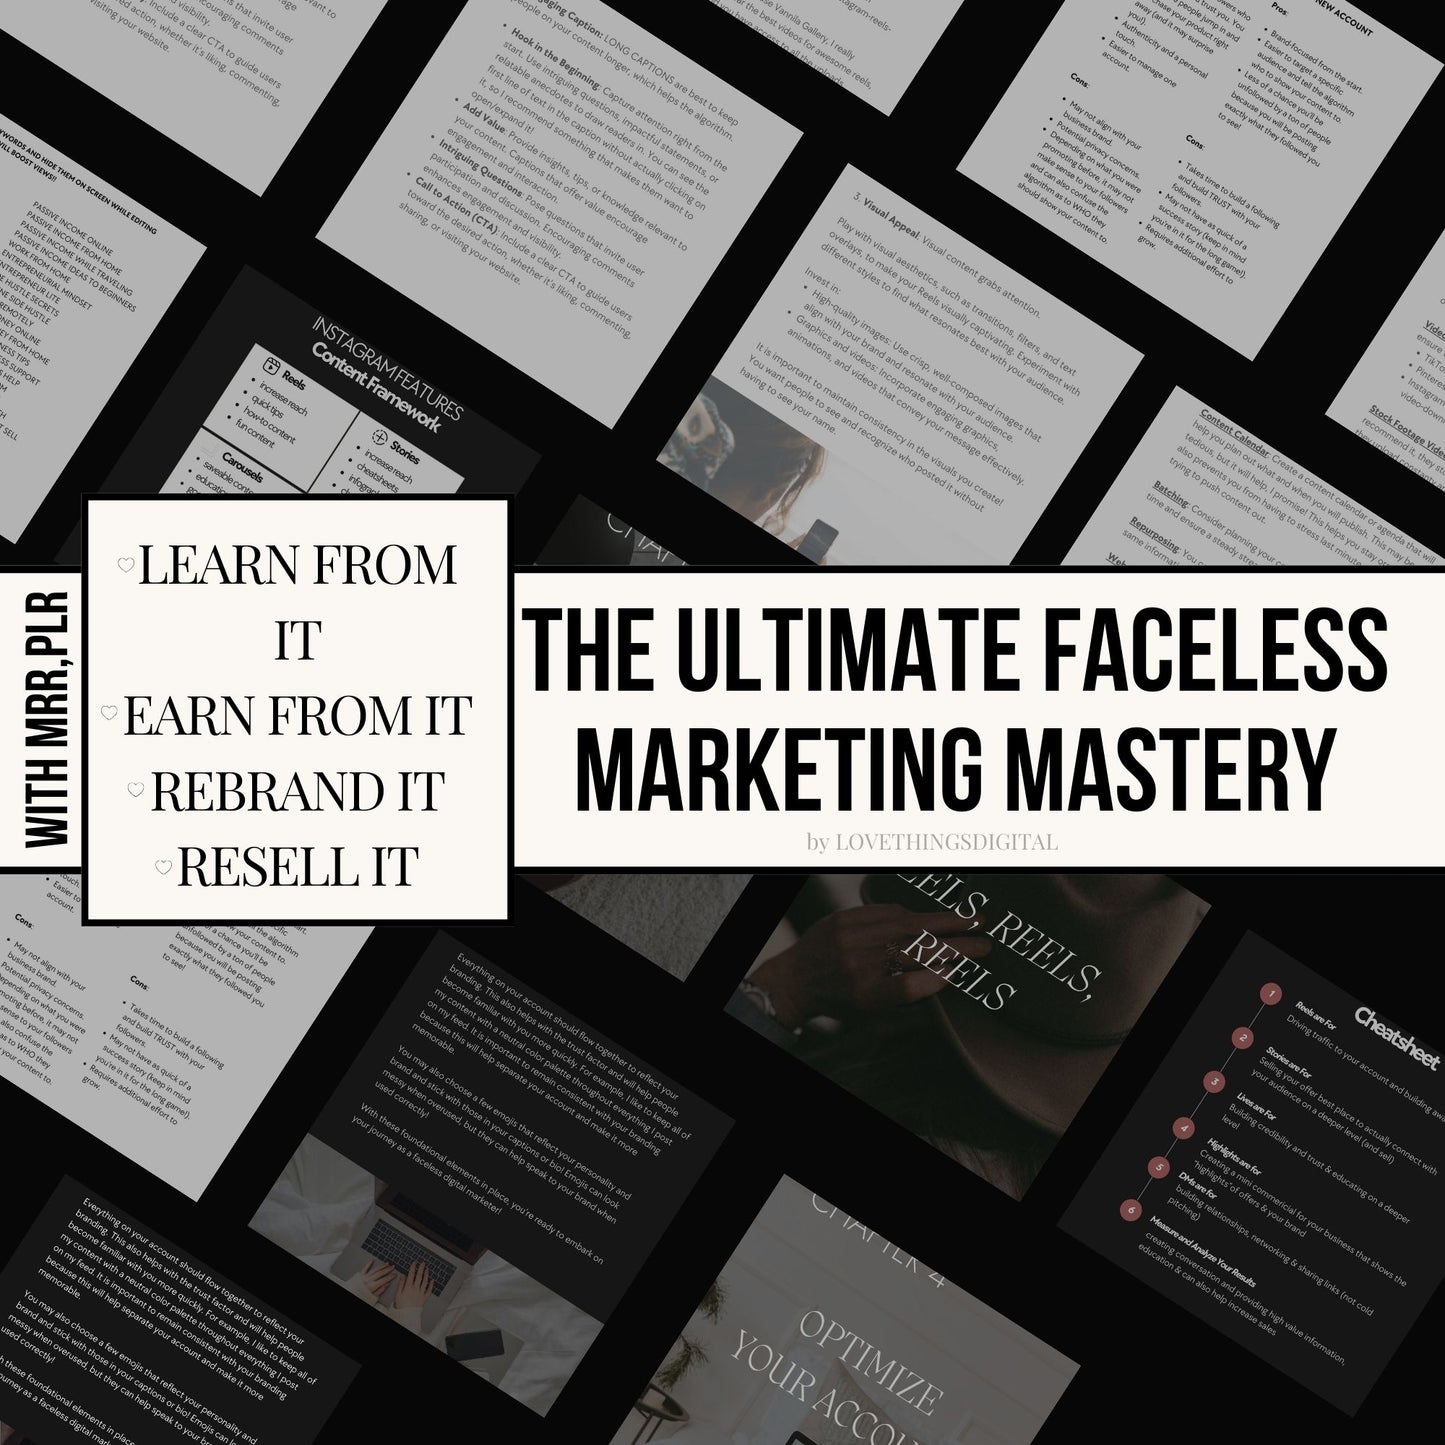 The Ultimate Faceless Marketing Mastery Guide